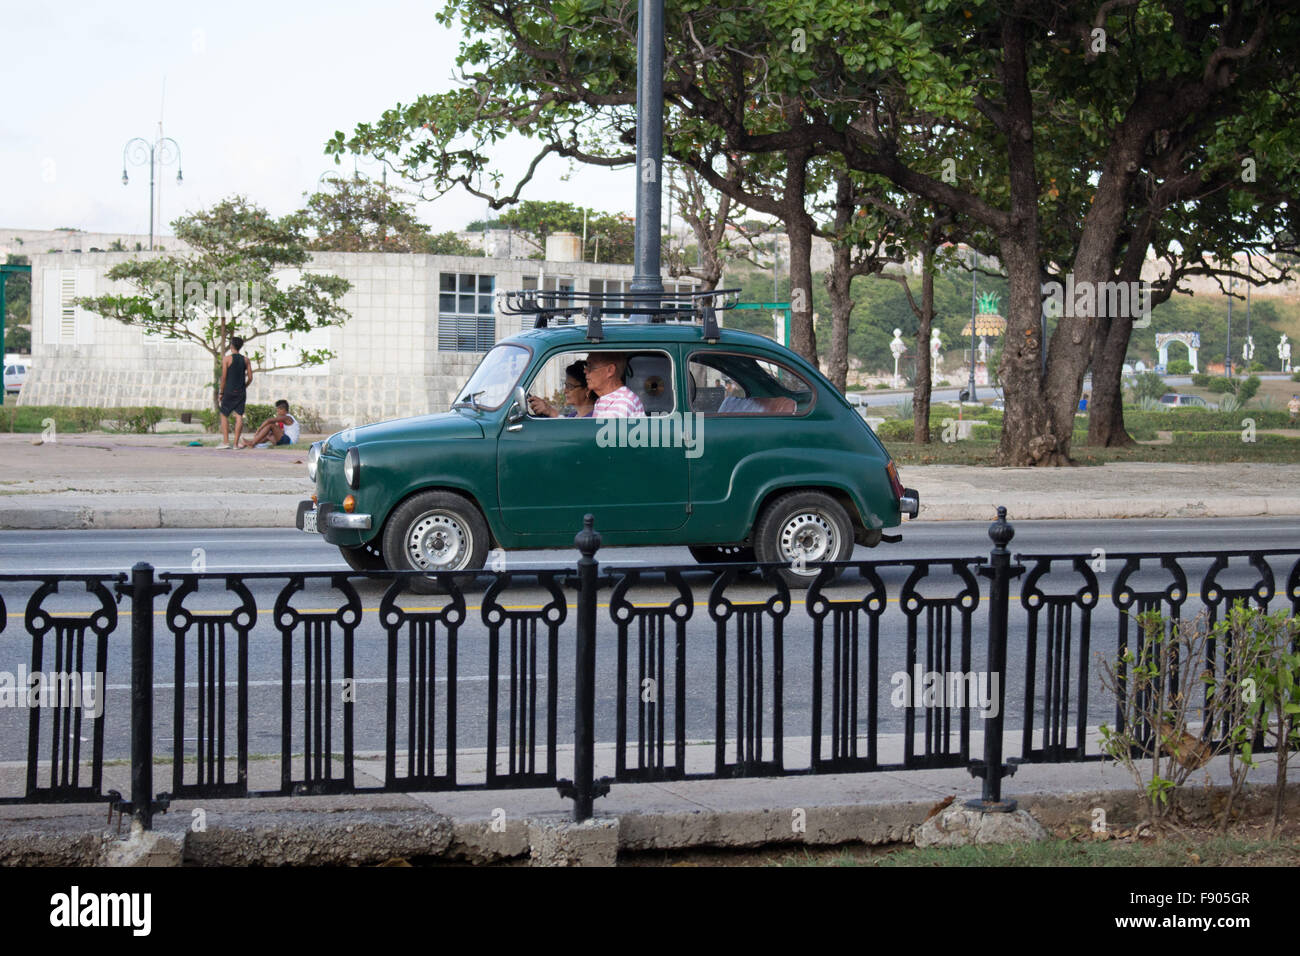 People are driving an old green car in Cuba. They are in Habana Stock Photo